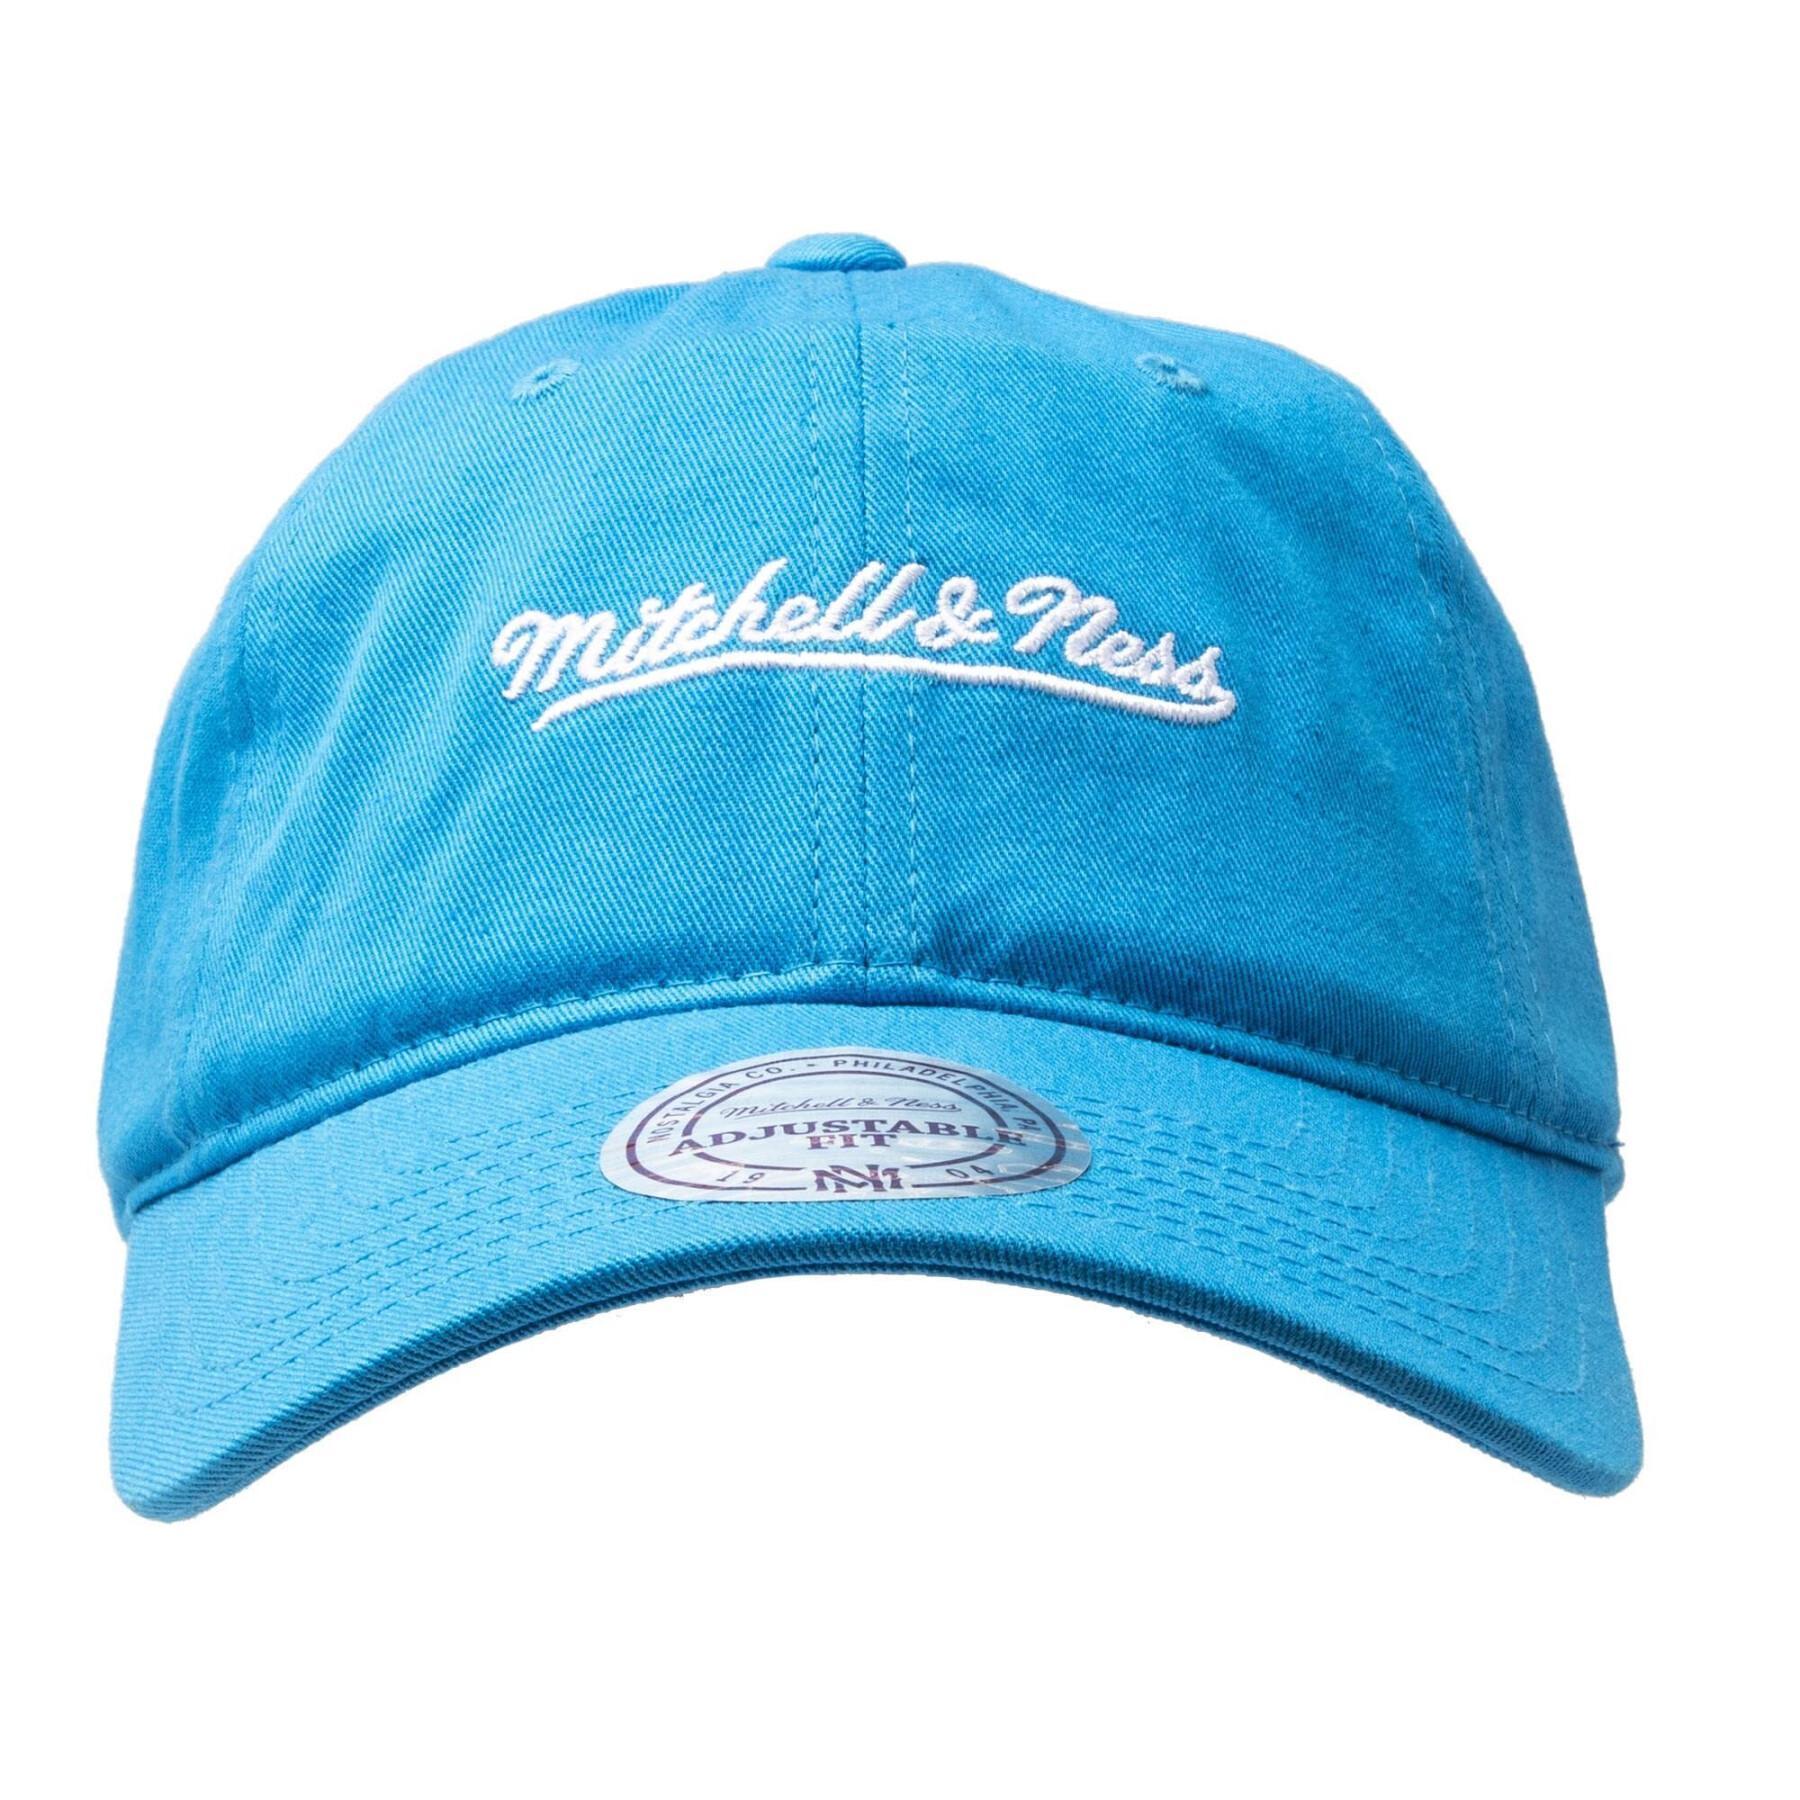 Casquette Mitchell & Ness washed cotton dad